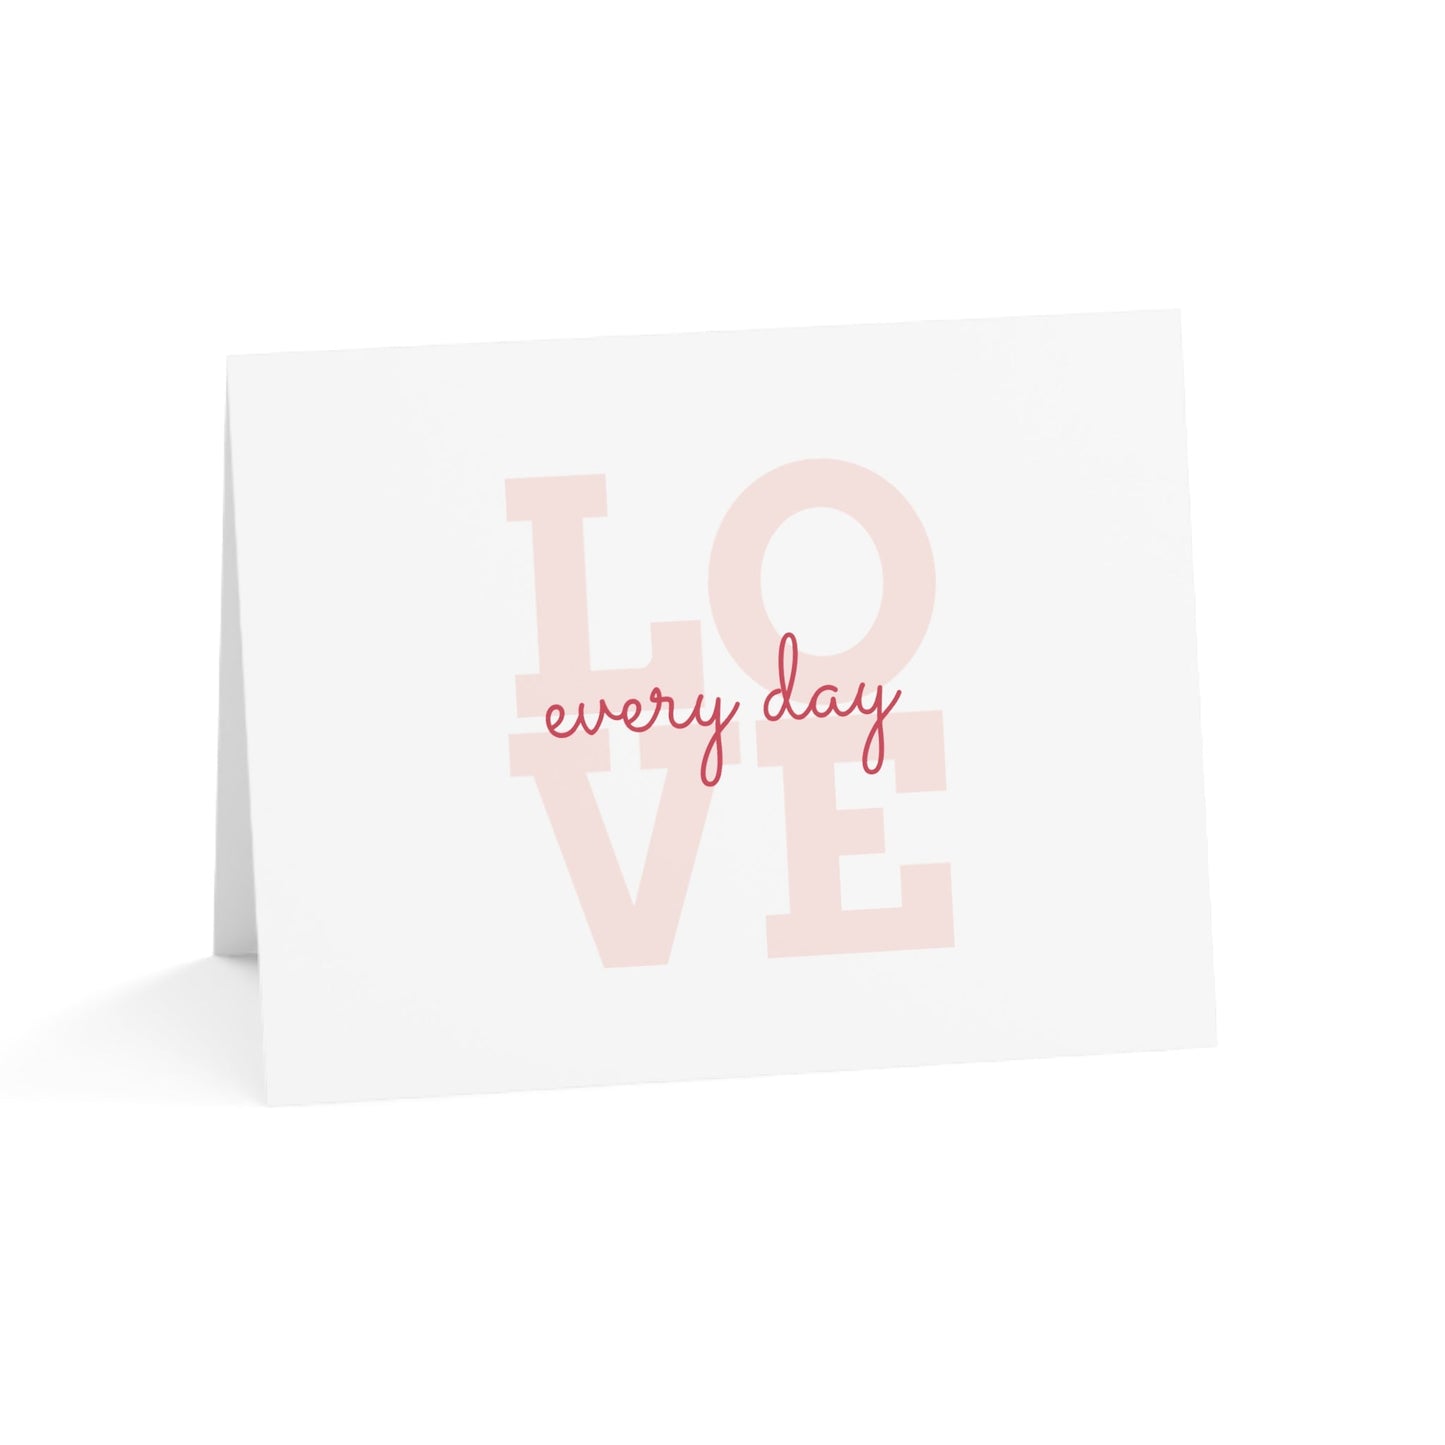 Love every day Greeting Cards (1, 10, 30, and 50pcs) Valentine's Day Holiday, Anytime - Lizard Vigilante